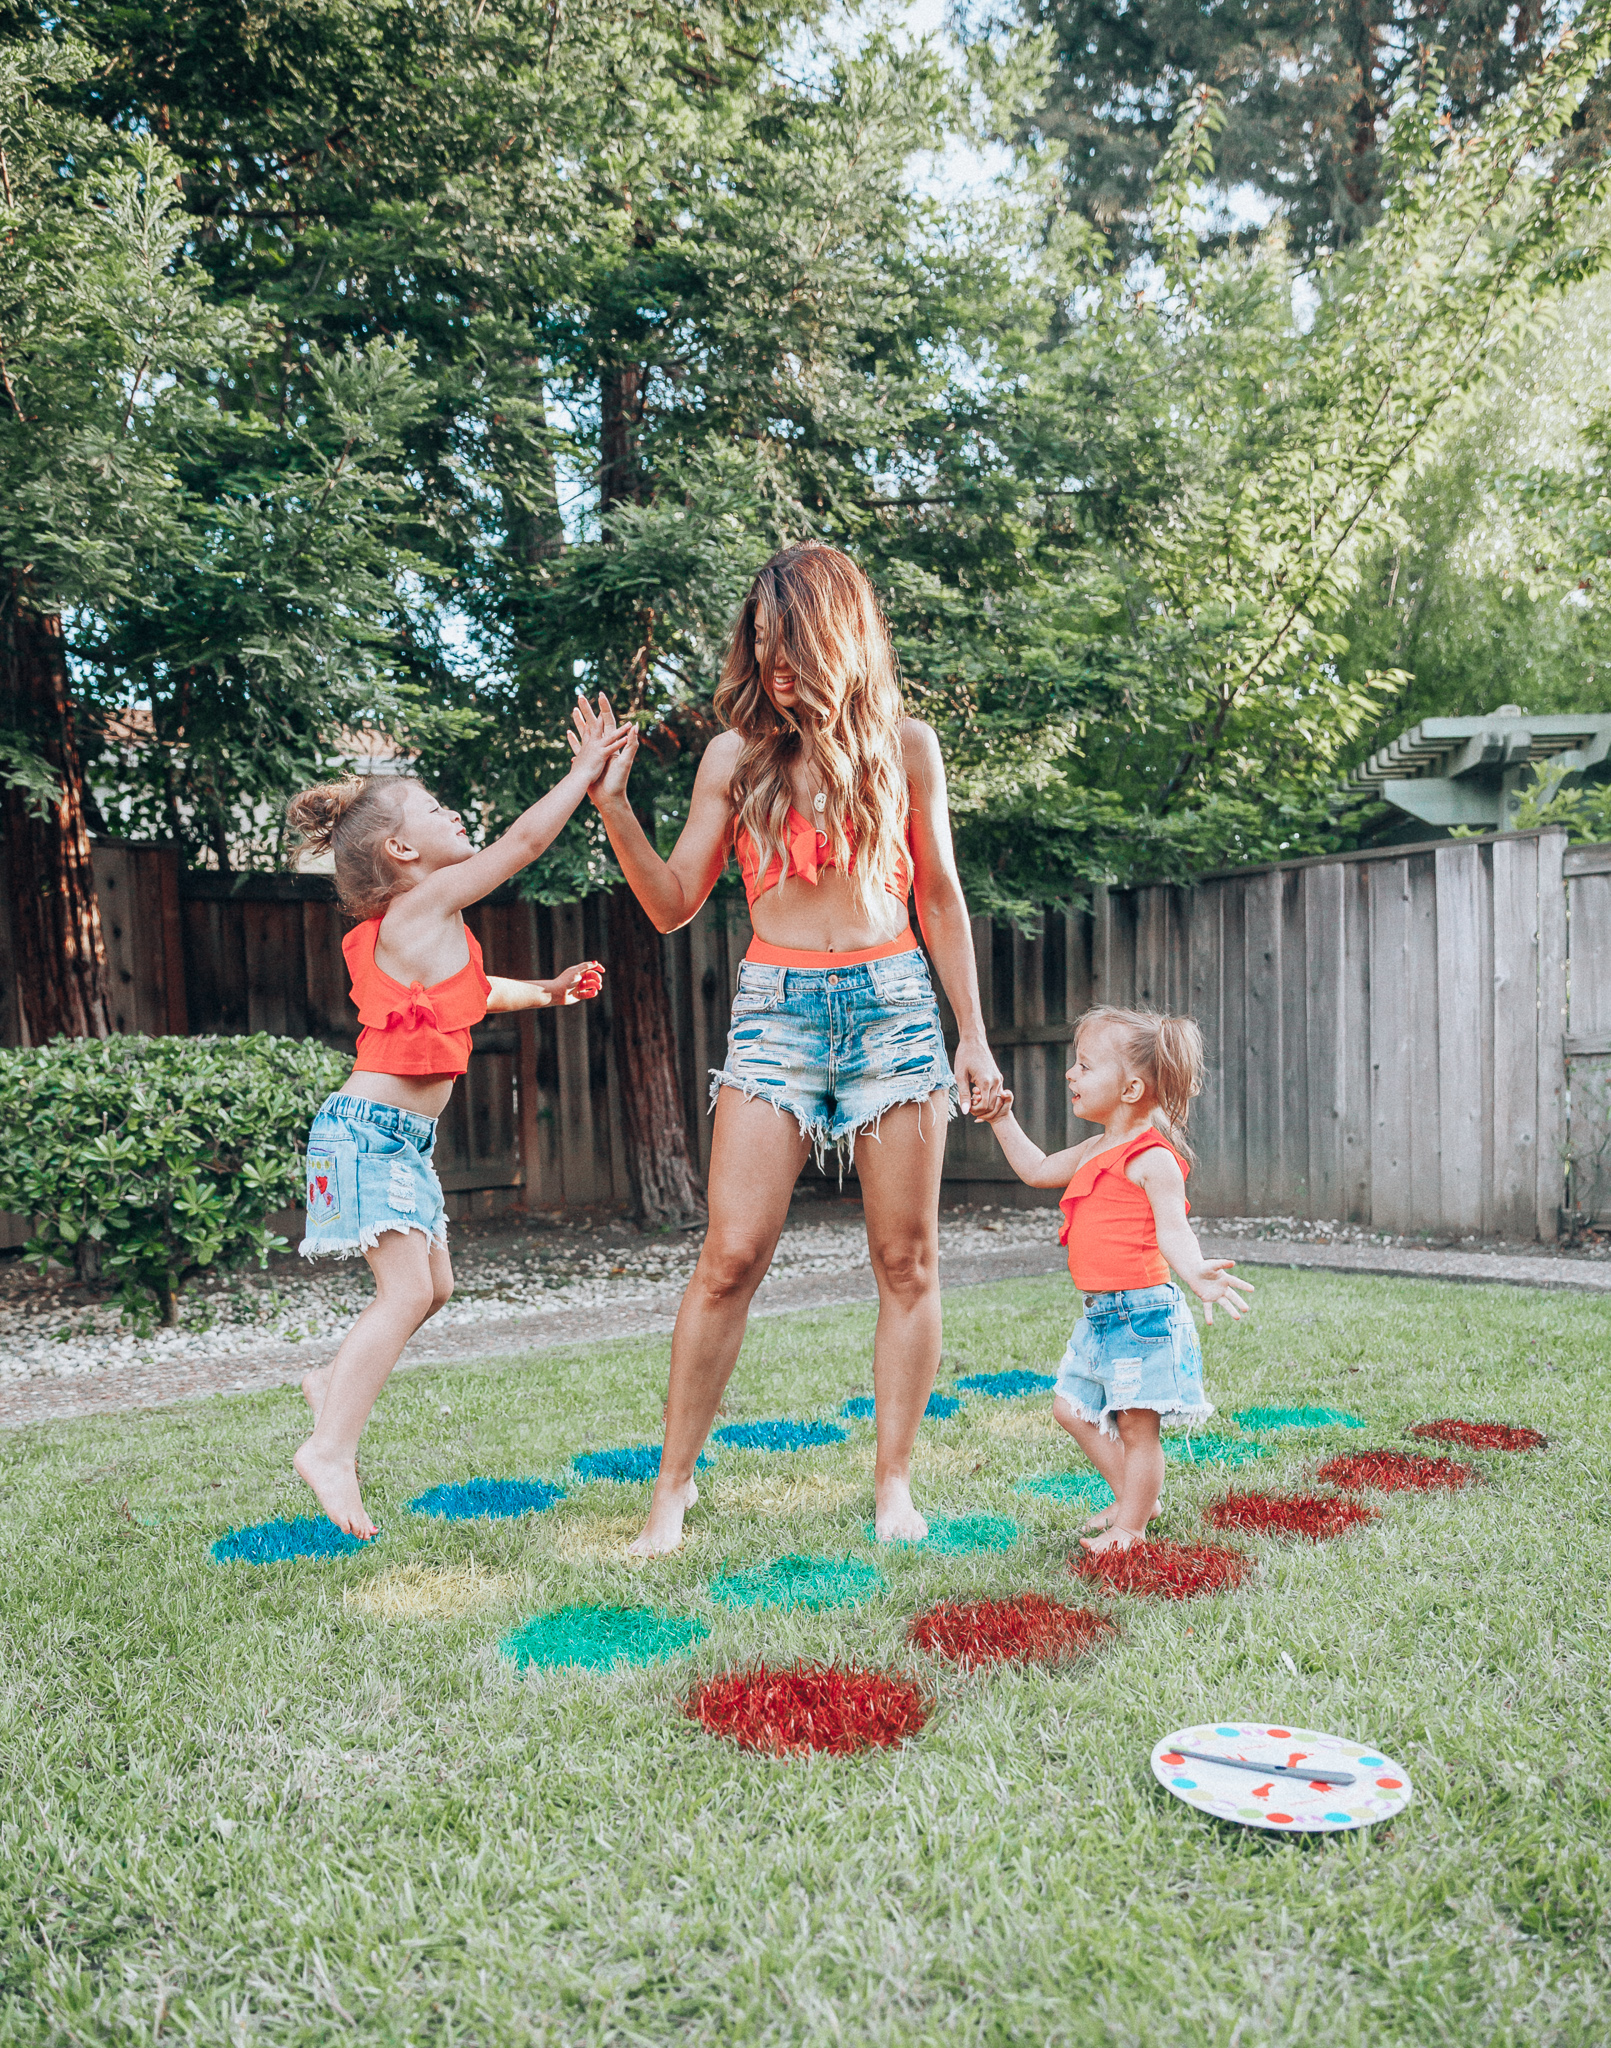 The Girl in the Yellow Dress | Latisha Springer | Fun Summer Activities for Kids by top US mom blog, The Girl in the Yellow Dress: image of mom, young kids, backyard, grass, cutoff shorts, red swimming suit tops, and twister game.